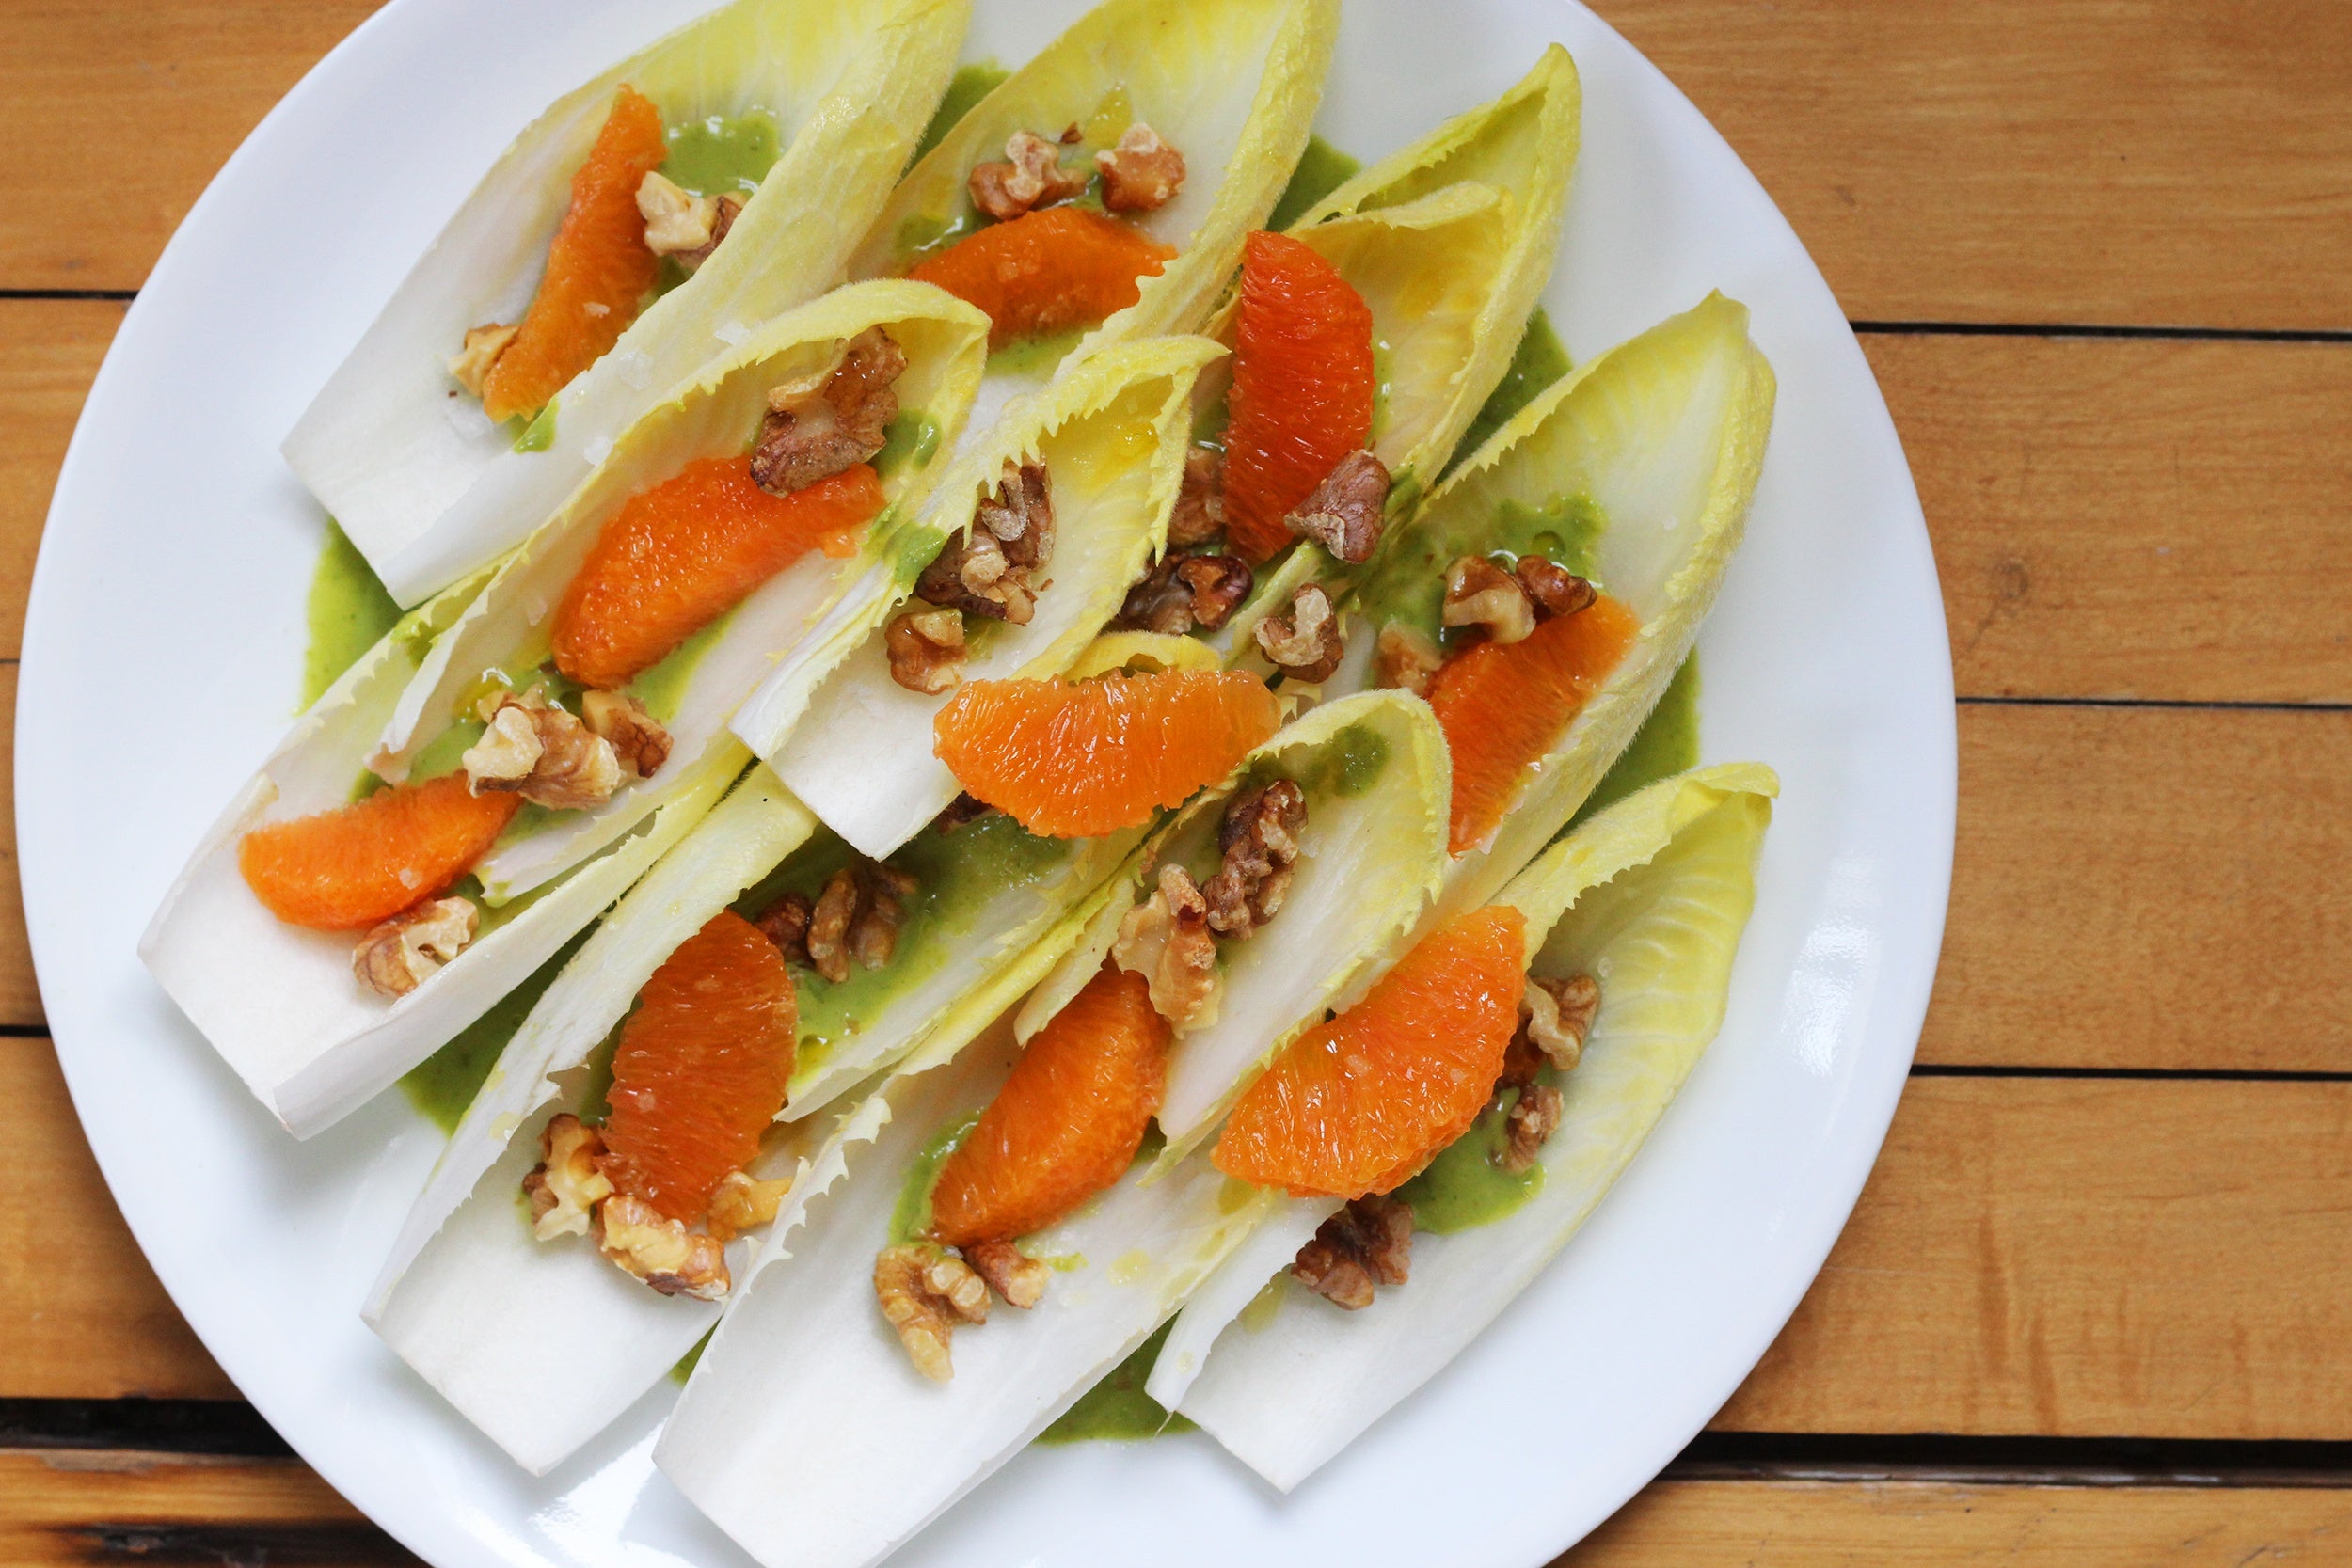 Endive leaves topped with cara cara orange segments and toasted walnuts